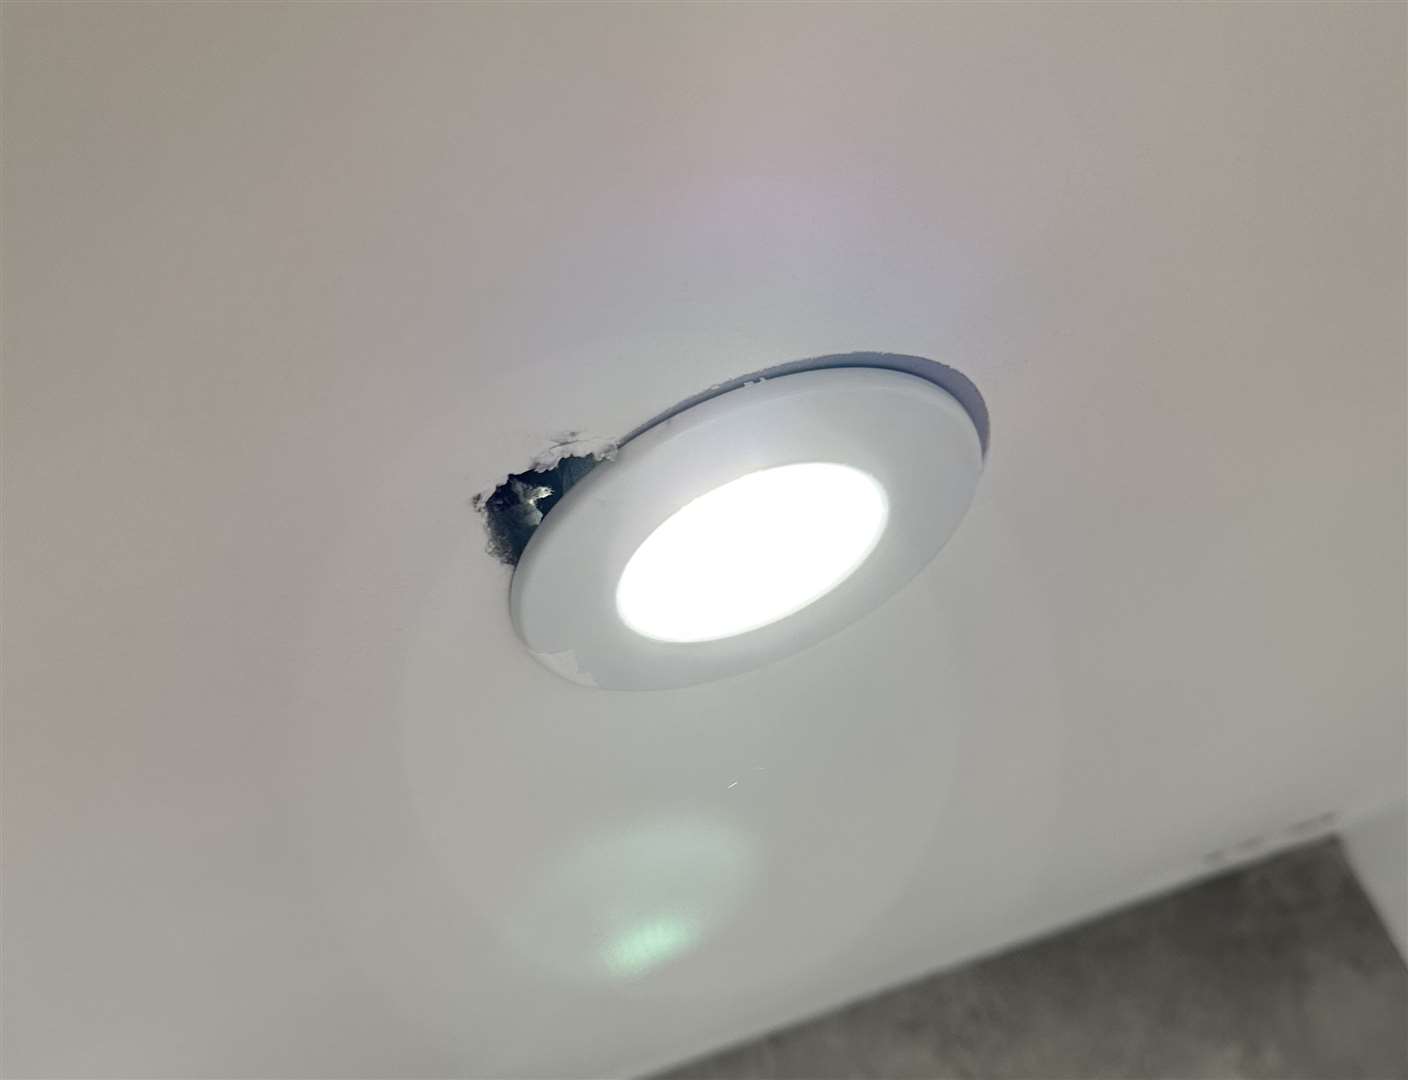 A hole next to a light-fitting in the new-build Herne Bay home. Photo: Alex Marcu